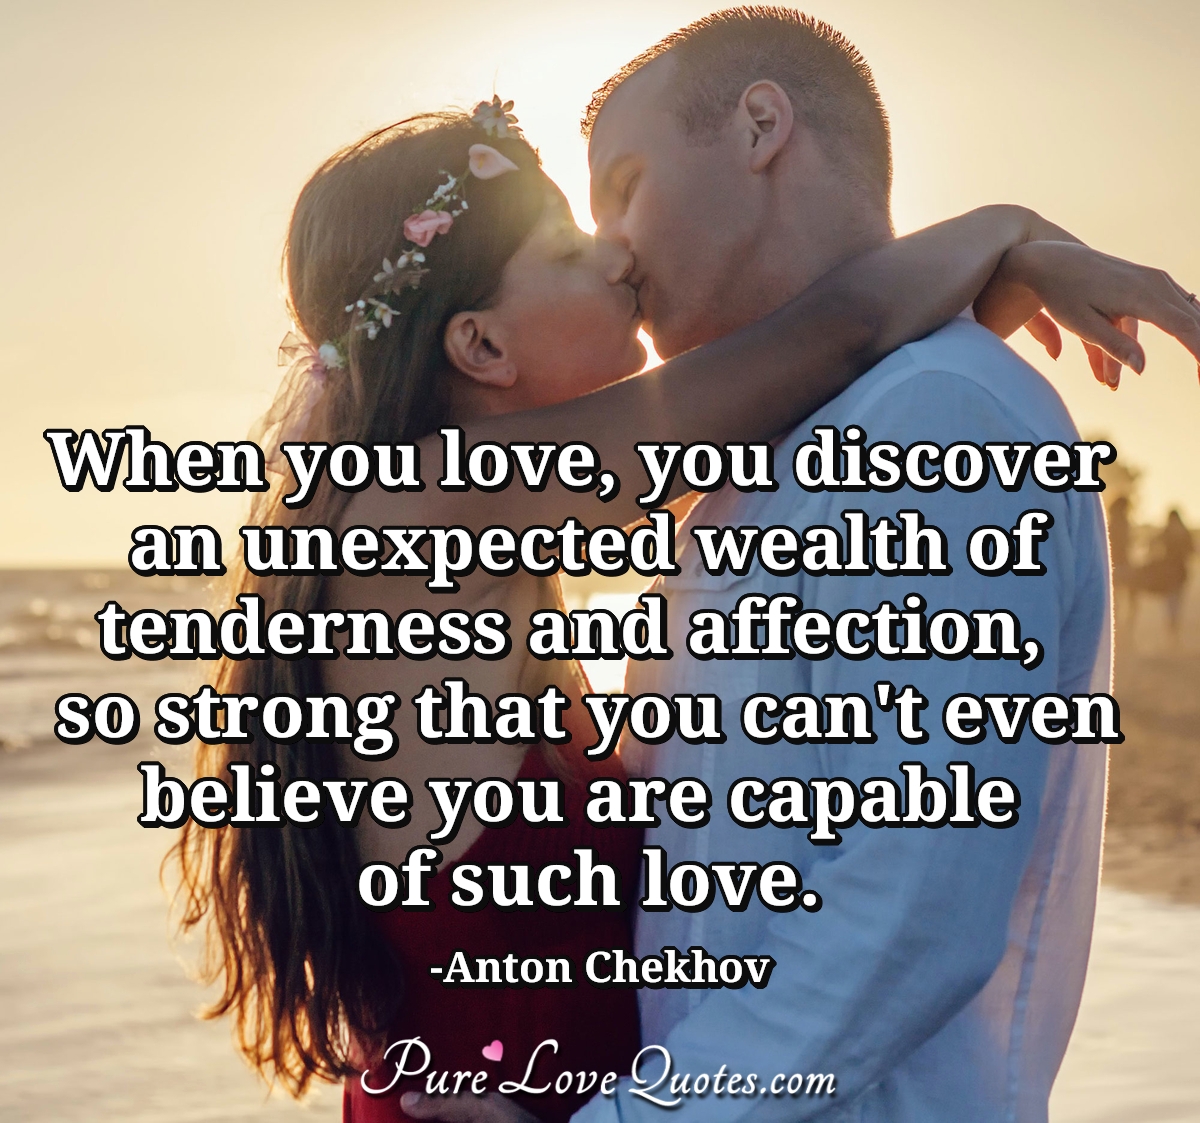 When you love, you discover an unexpected wealth of tenderness and affection,  so strong that you can't even believe you are capable of such love. - Anton Chekhov